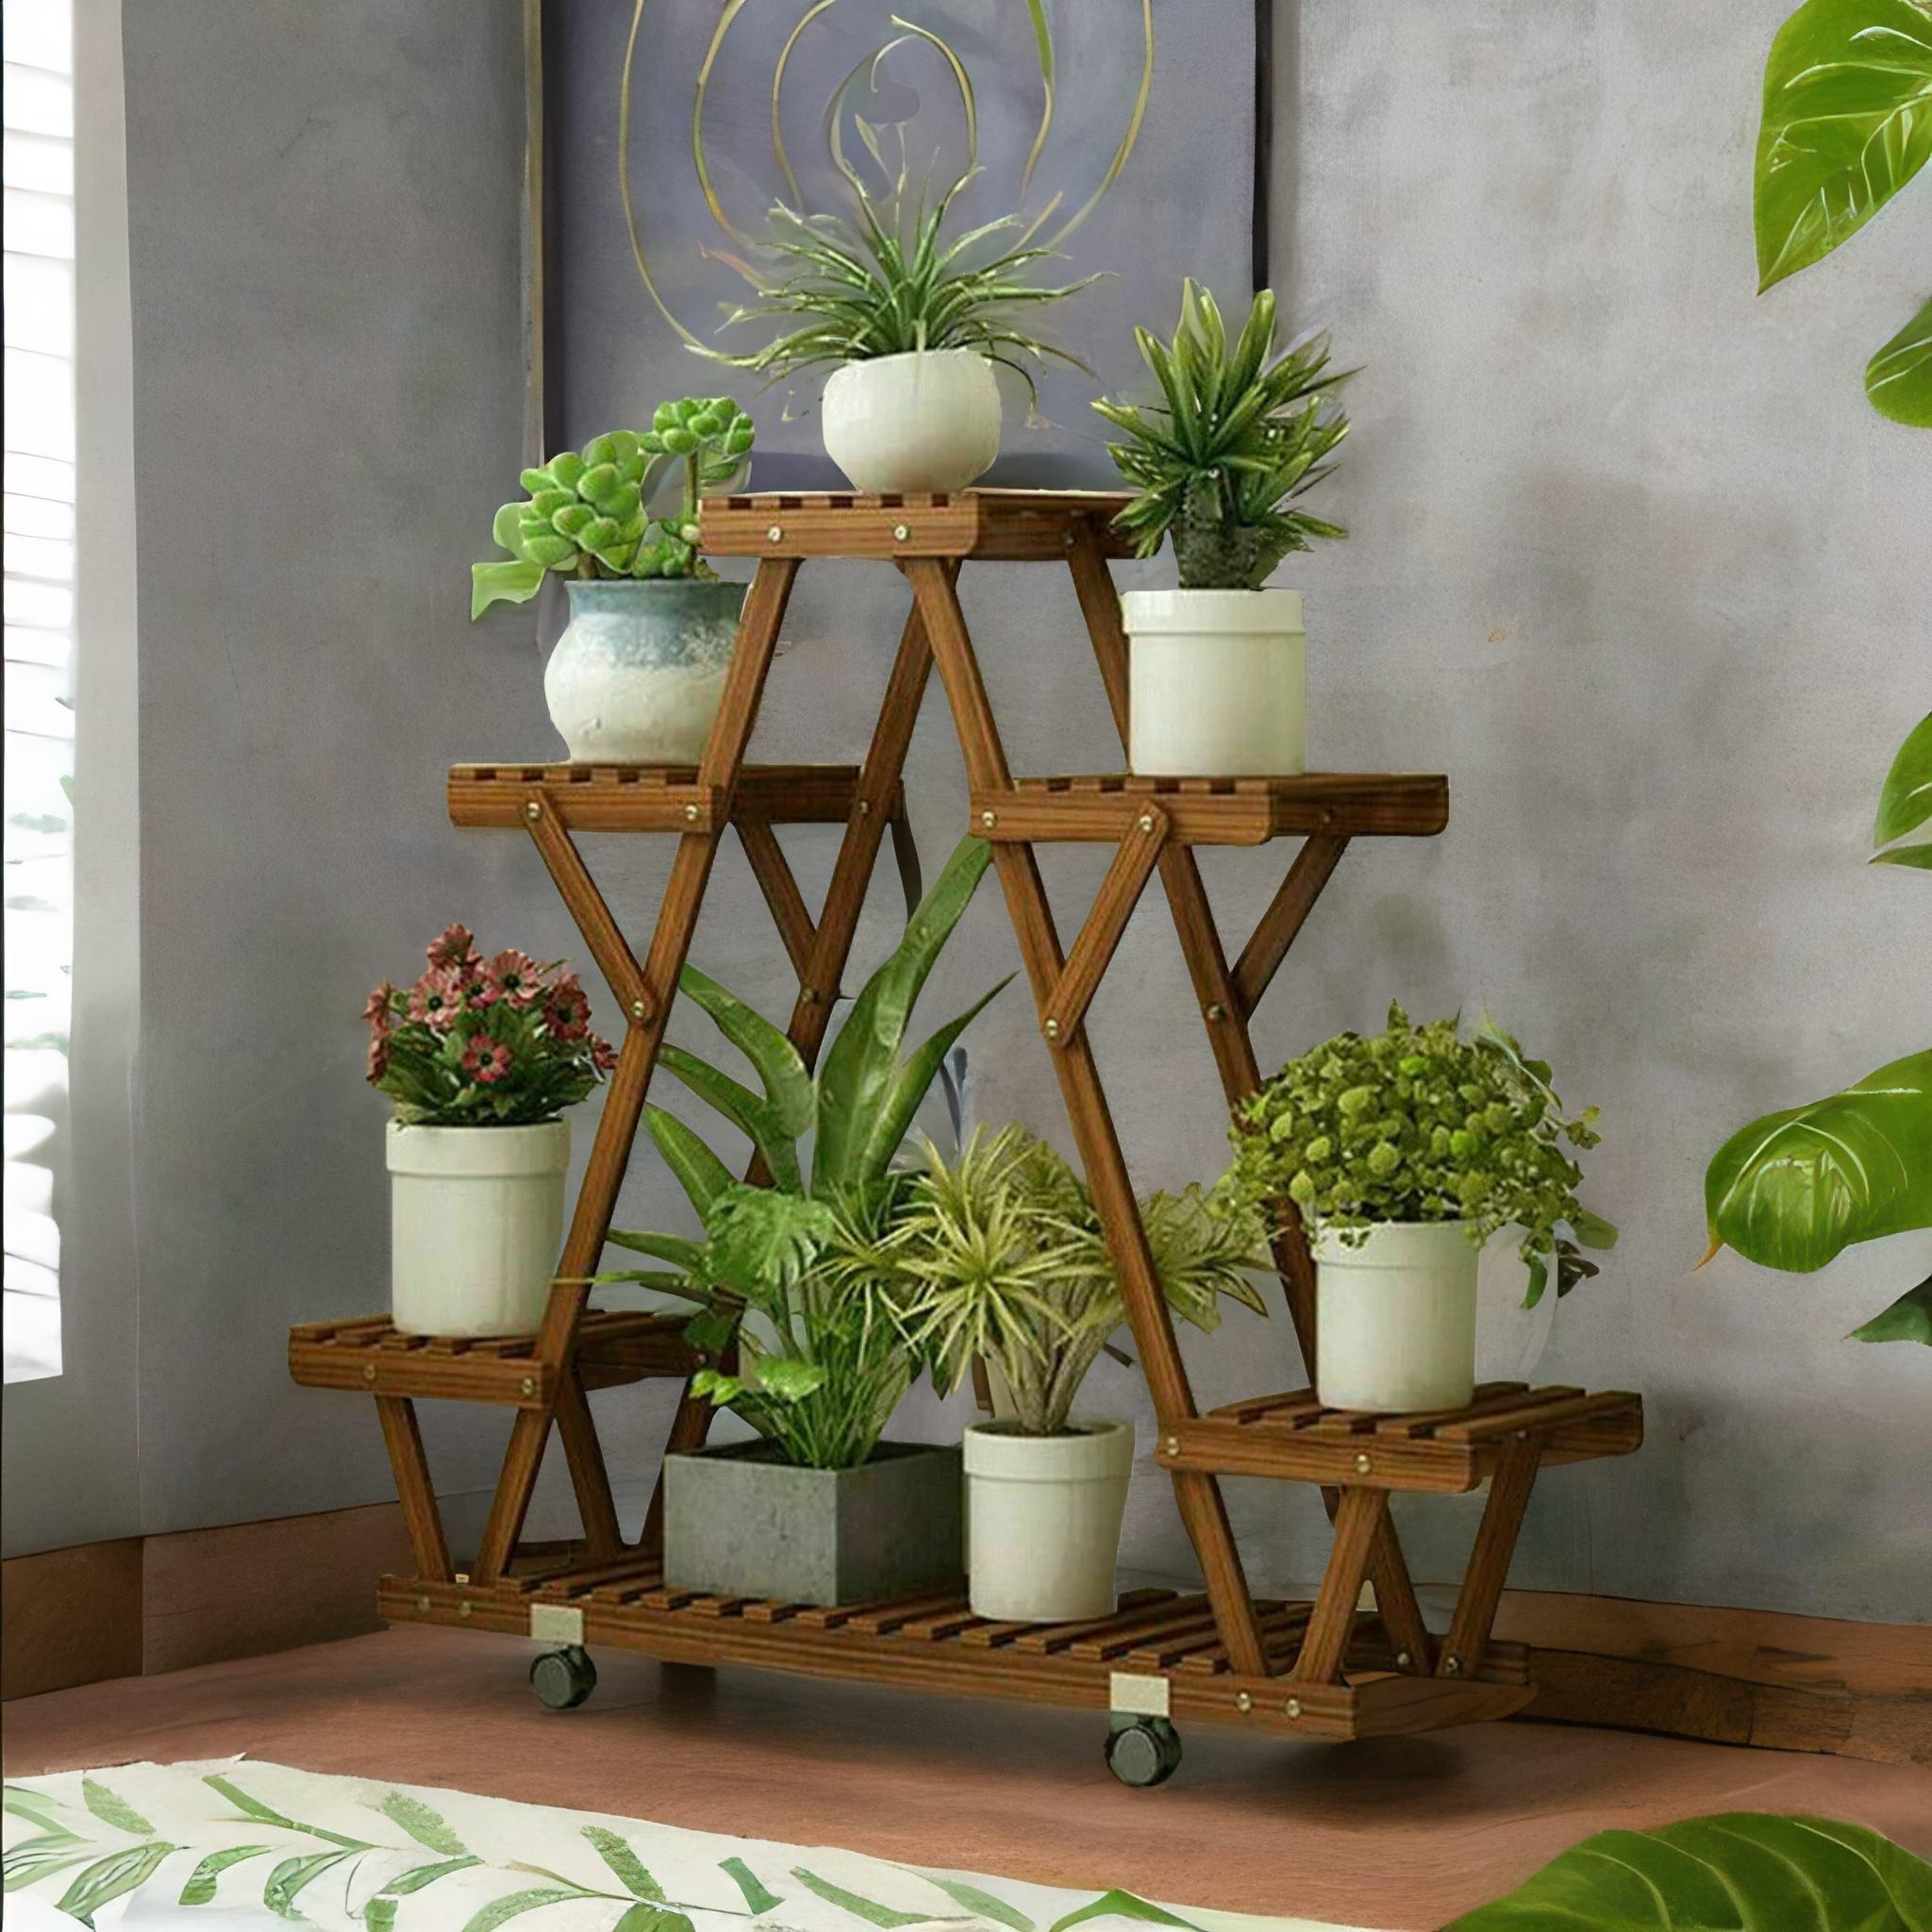 6 Tier Bamboo Wooden Plant Stand With Lockable Wheels - image 1